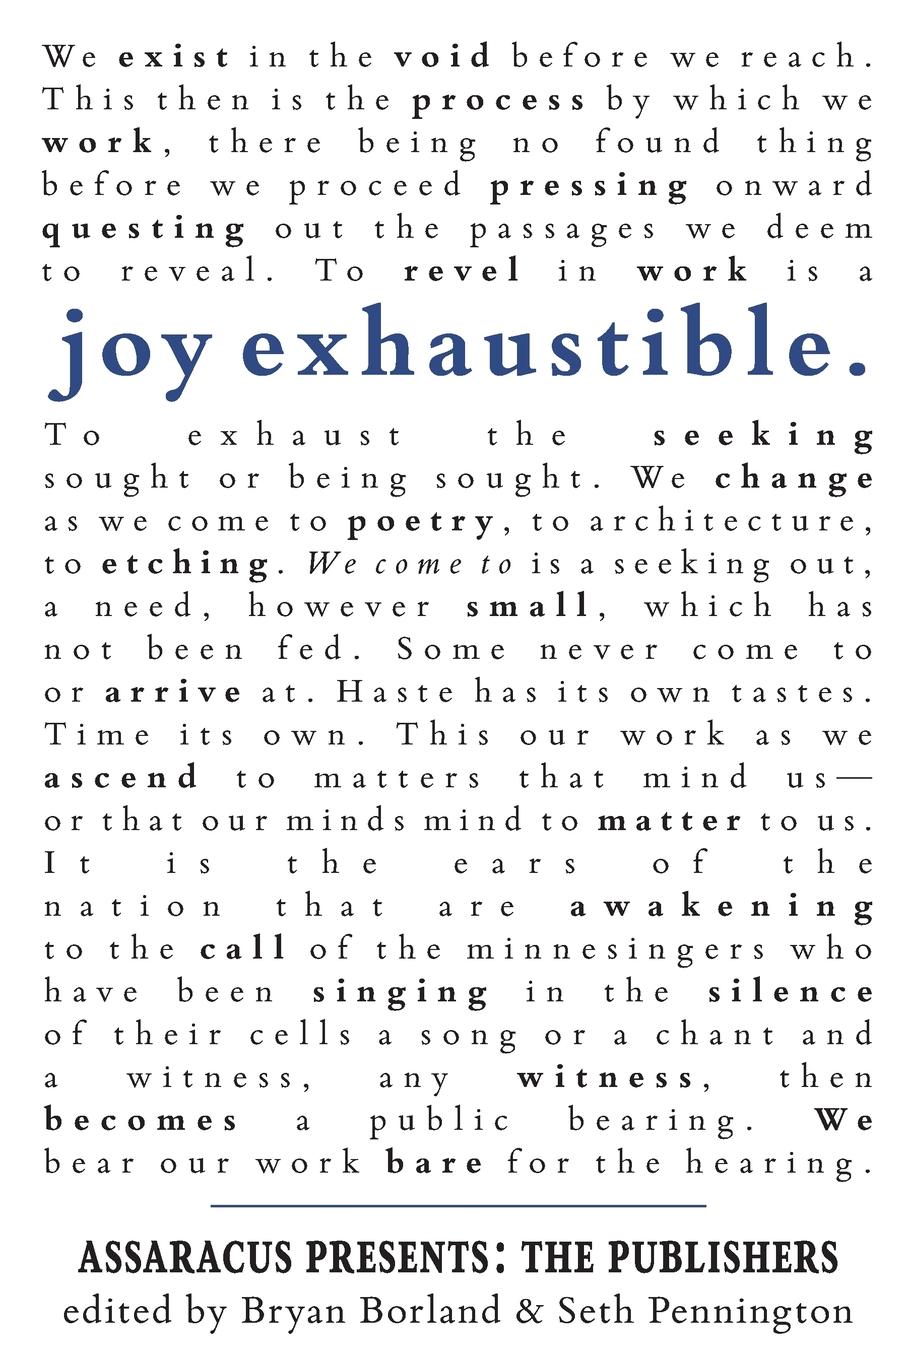 ALA Over the Rainbow Title! Joy Exhaustible: Assaracus Presents The Publishers